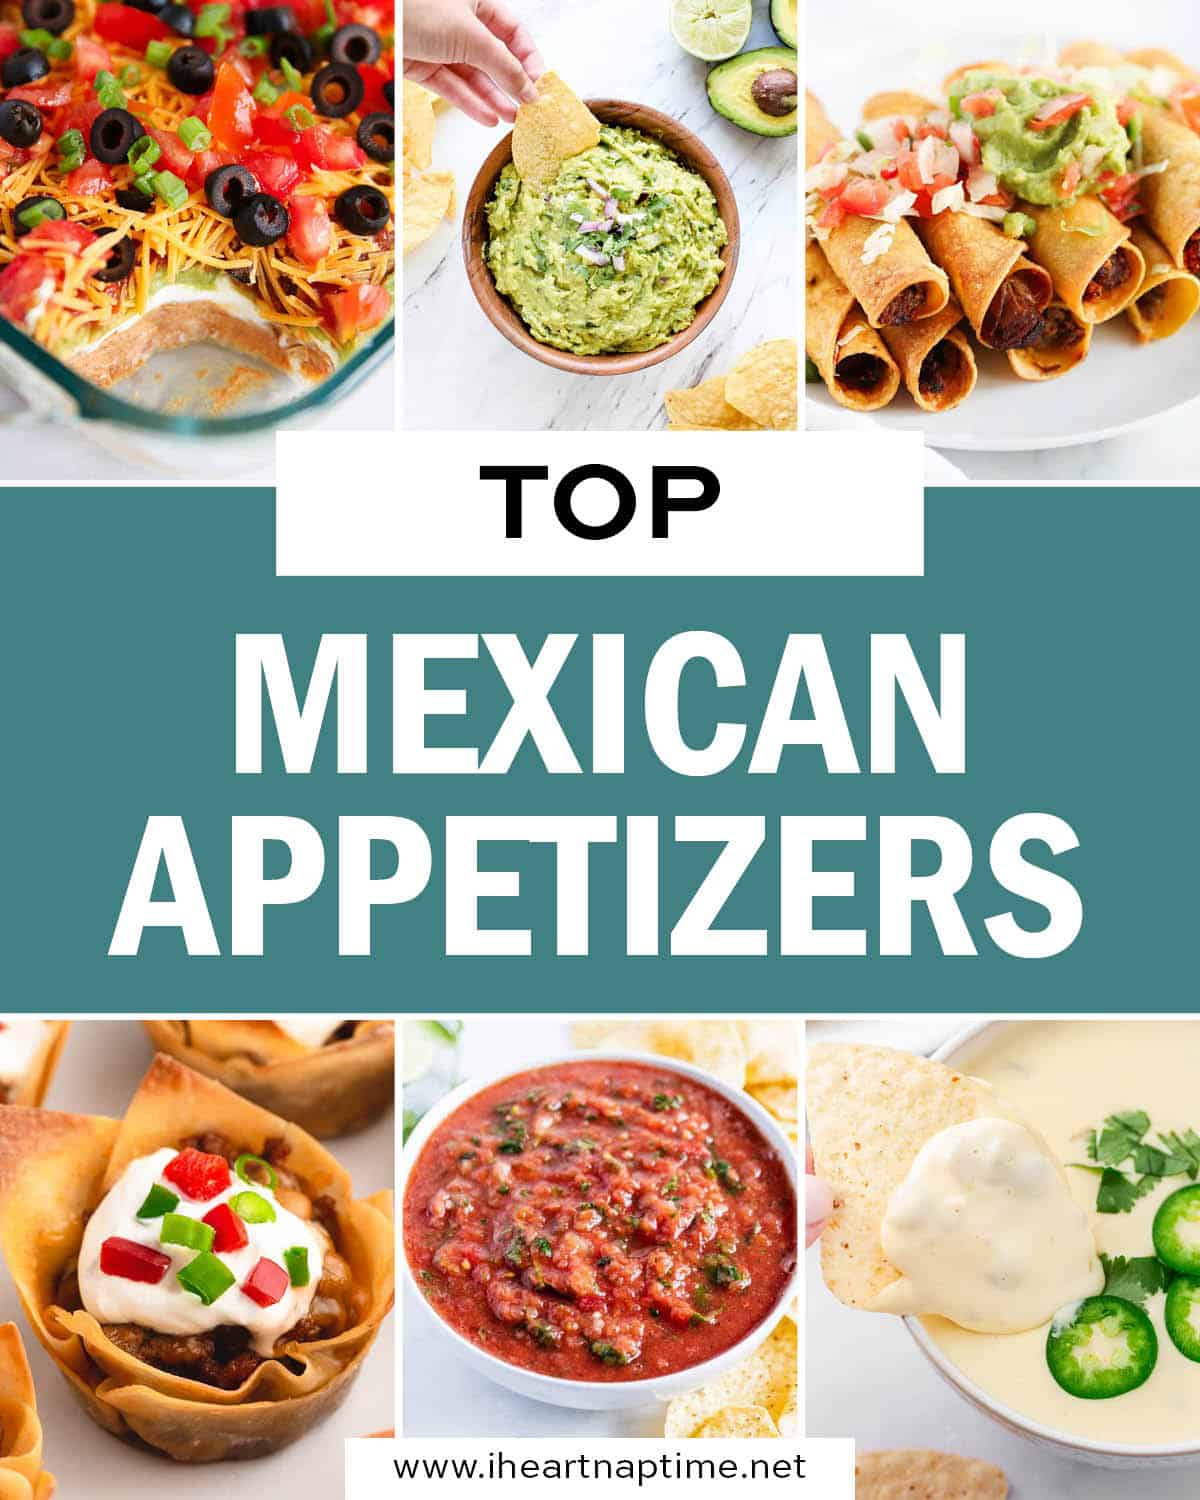 A photo collage of top Mexican appetizers.